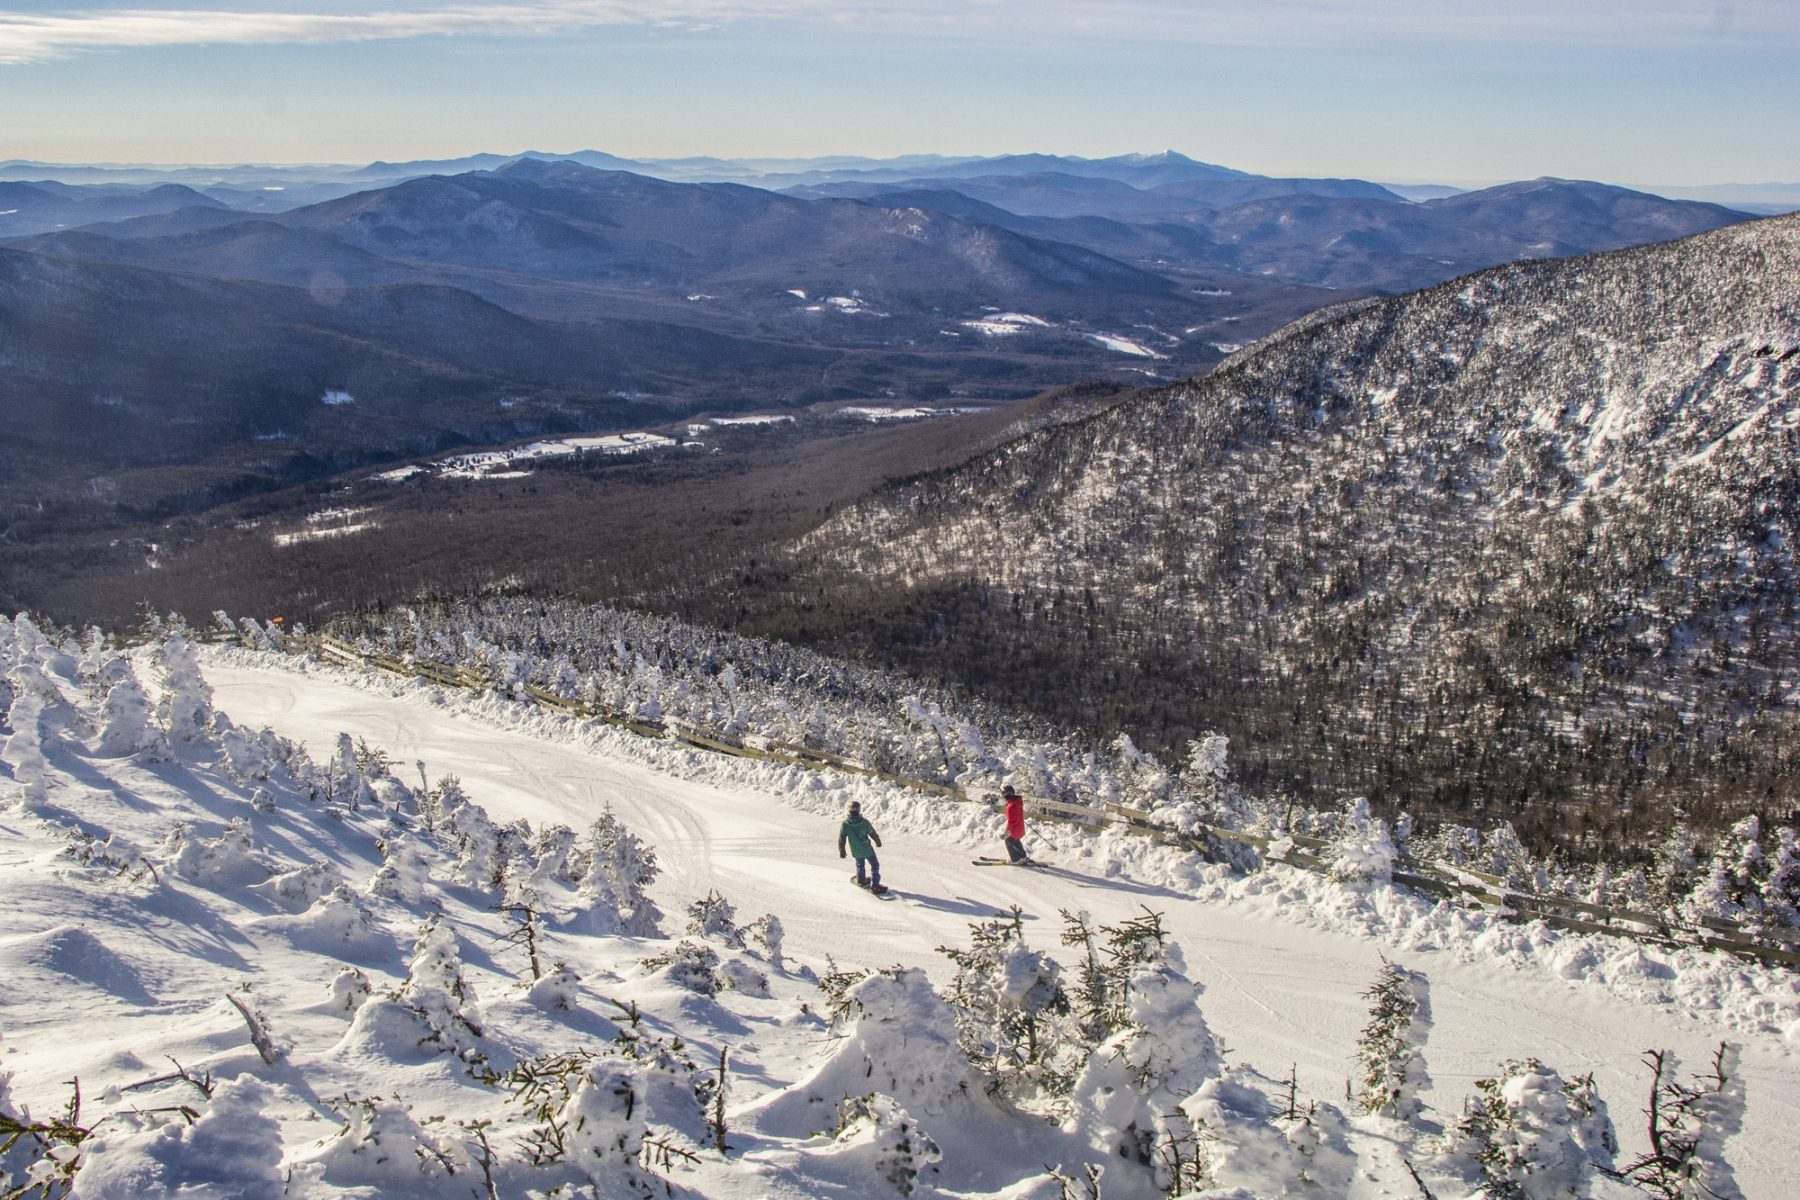 Jay Peak is officially for sale – will it be able to get the $250M to pay back investors? 